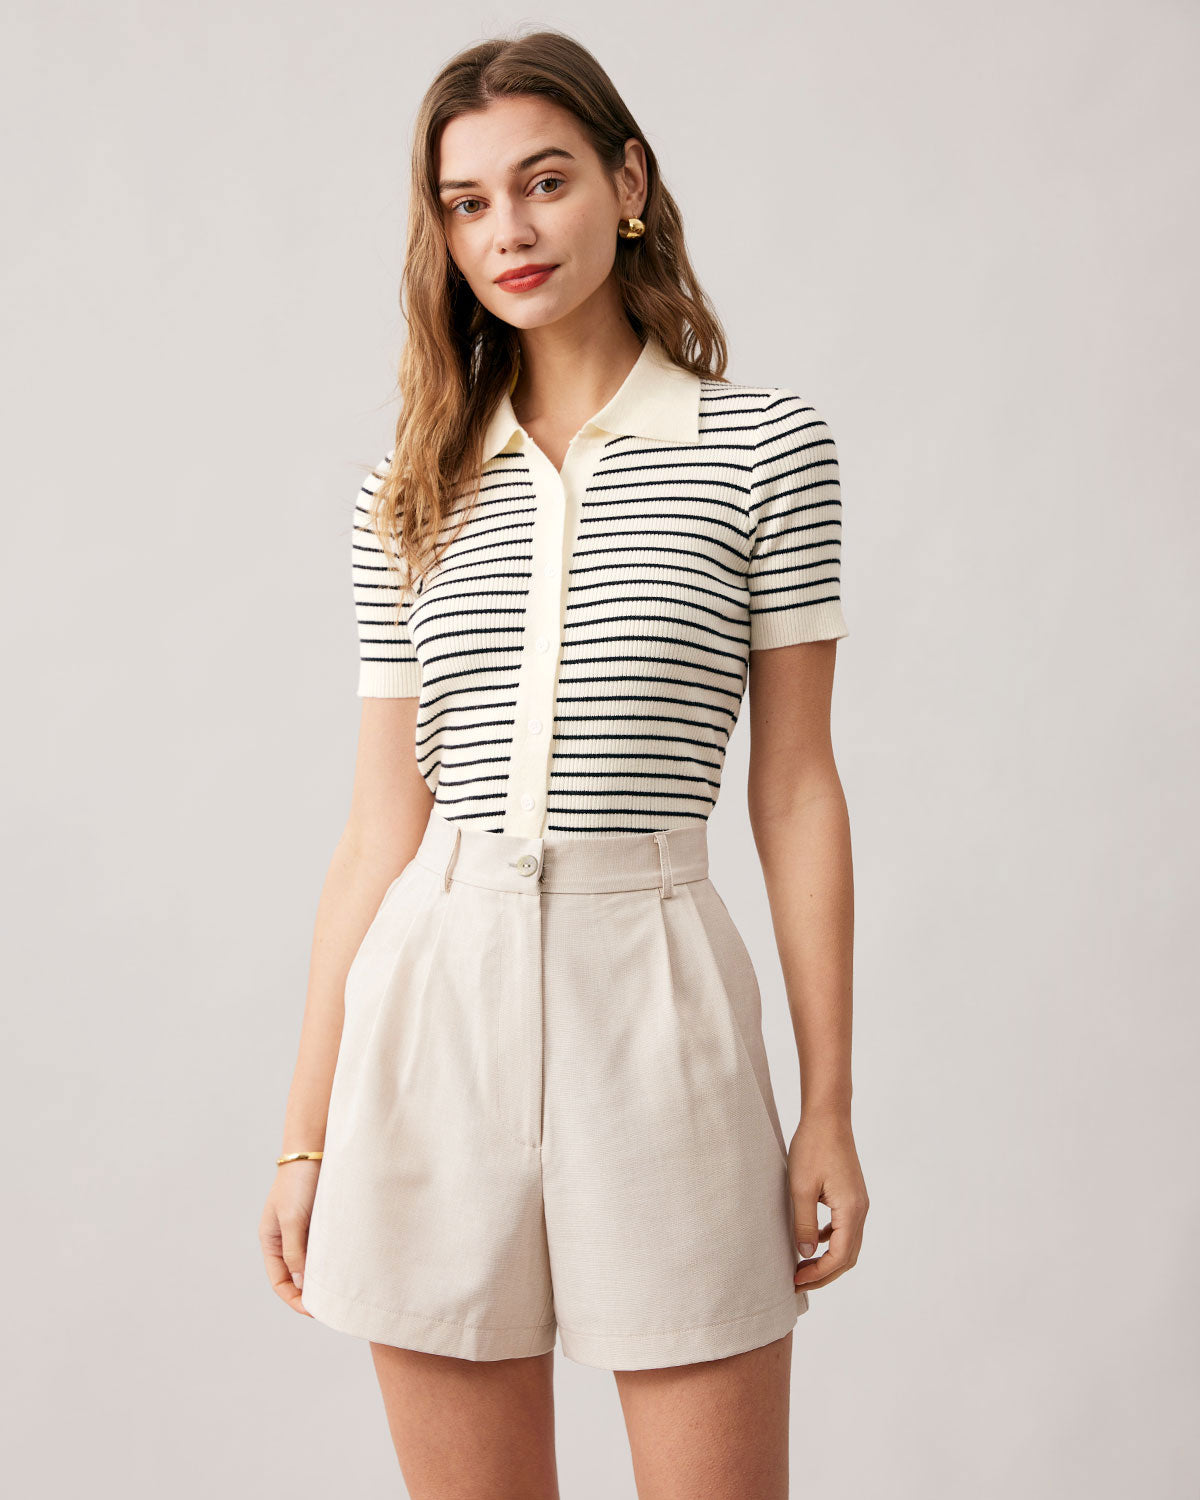 The Lapel Button Up Striped Knit Top